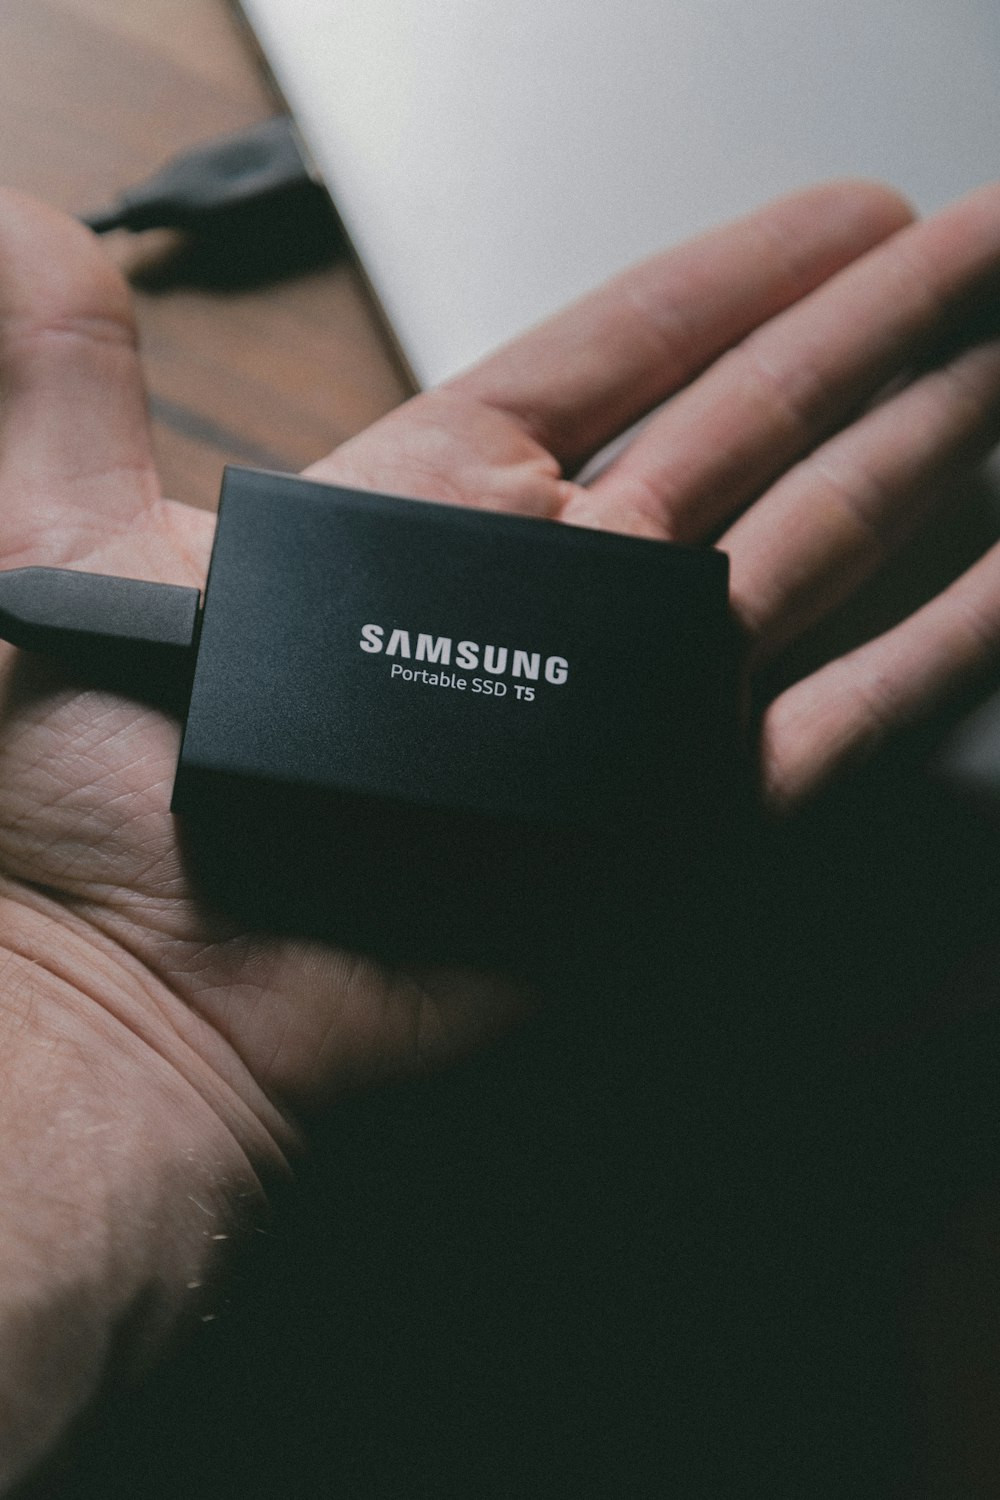 Samsung portable T5 SSD on person's hand